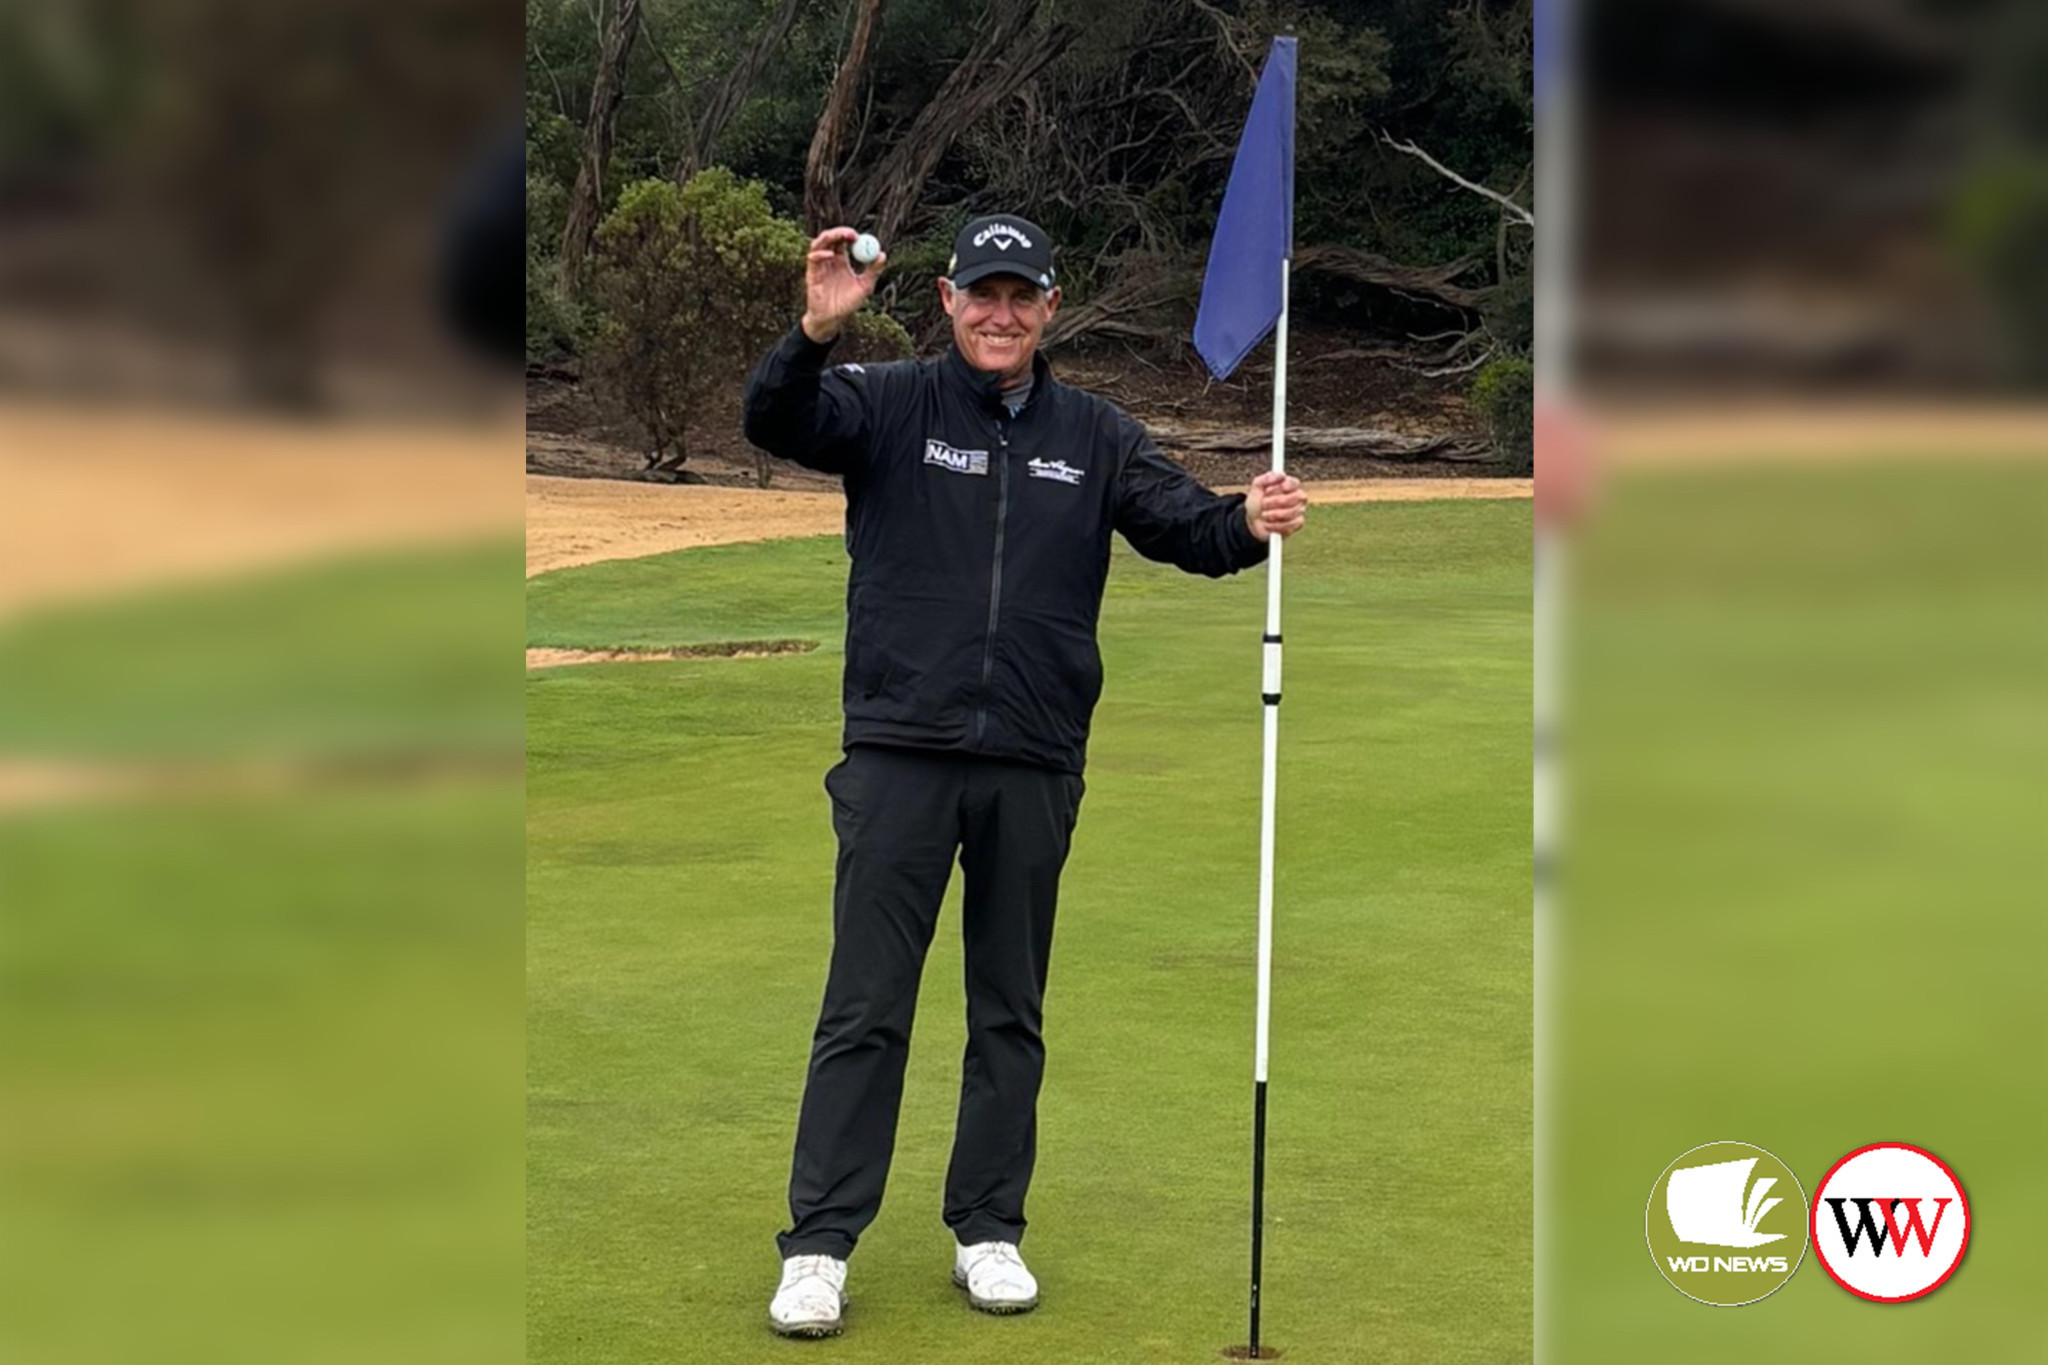 Hole-in-one...again - feature photo